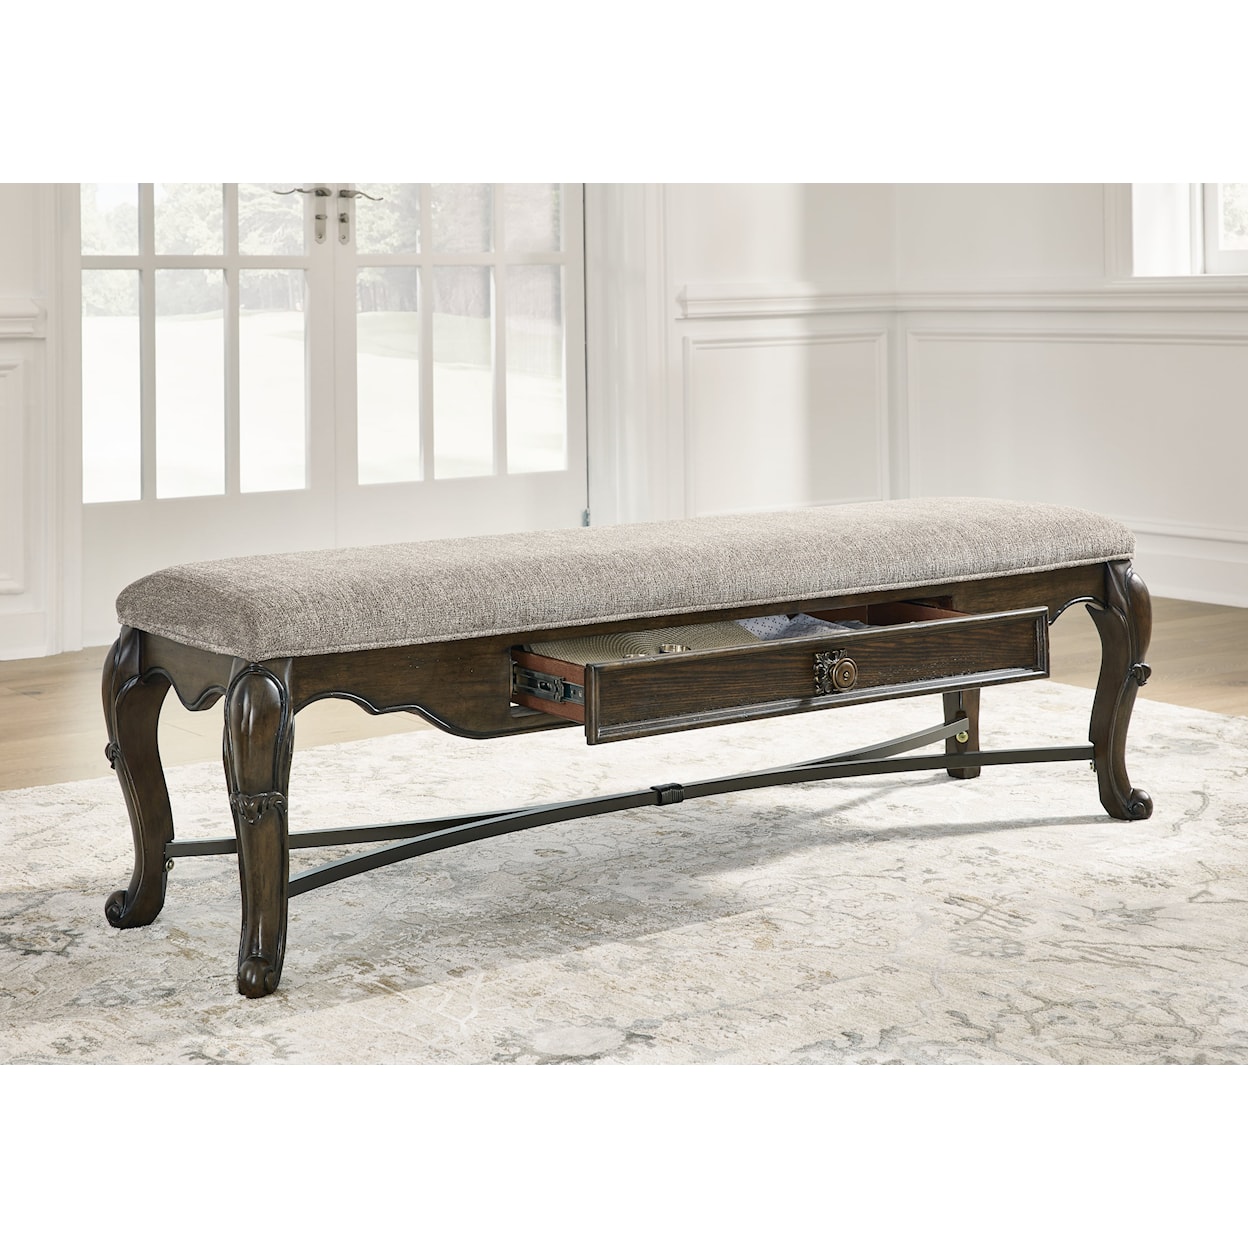 Signature Design by Ashley Furniture Maylee Upholstered Storage Bench